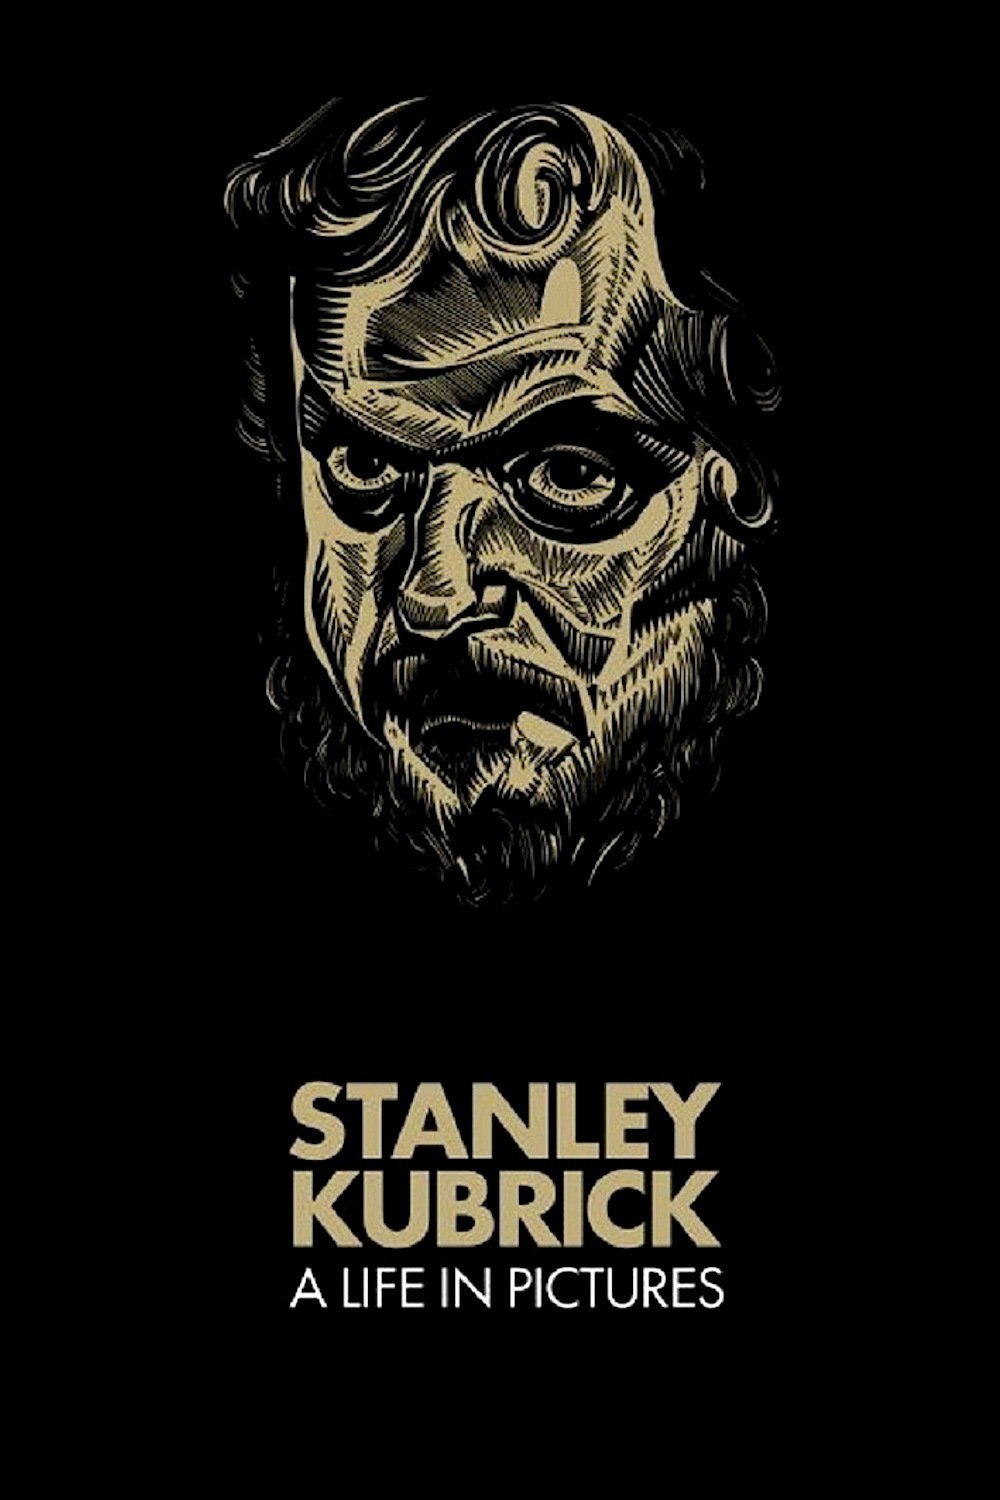 Poster for the movie "Stanley Kubrick: A Life in Pictures"